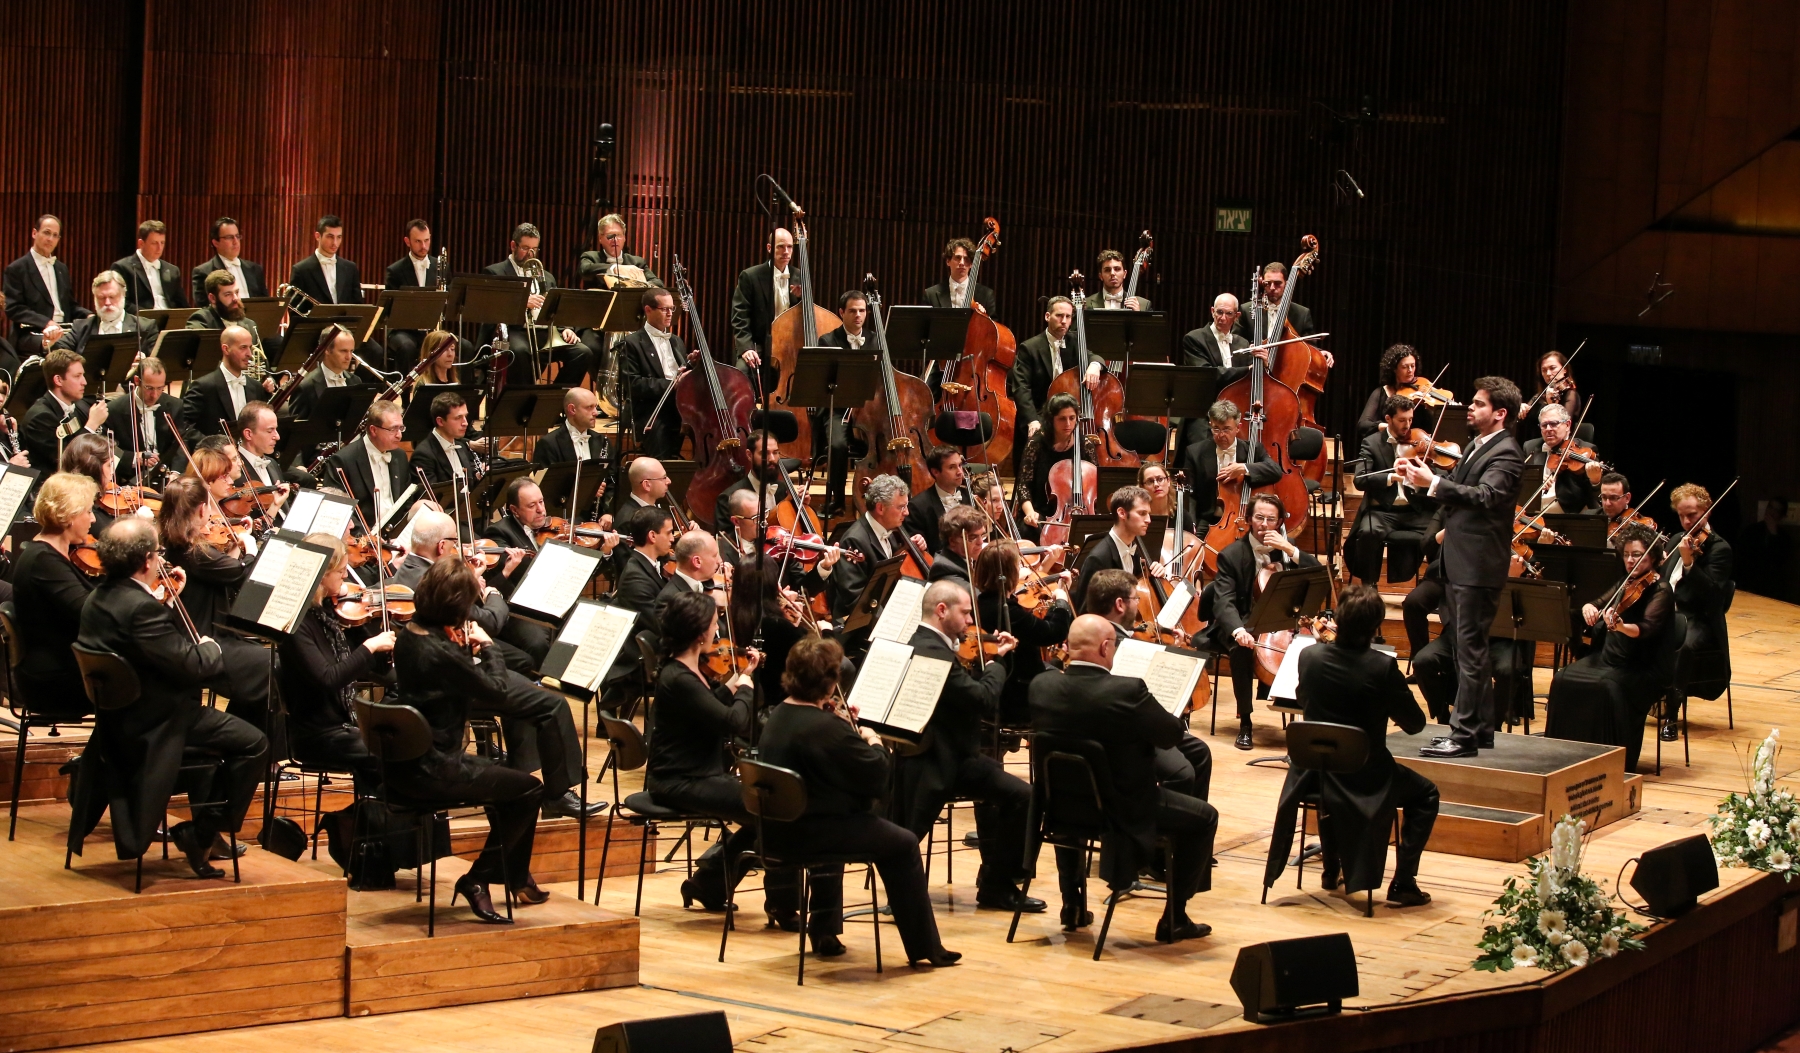 Musicians of Israel Philharmonic Orchestra on a stage during some concert.